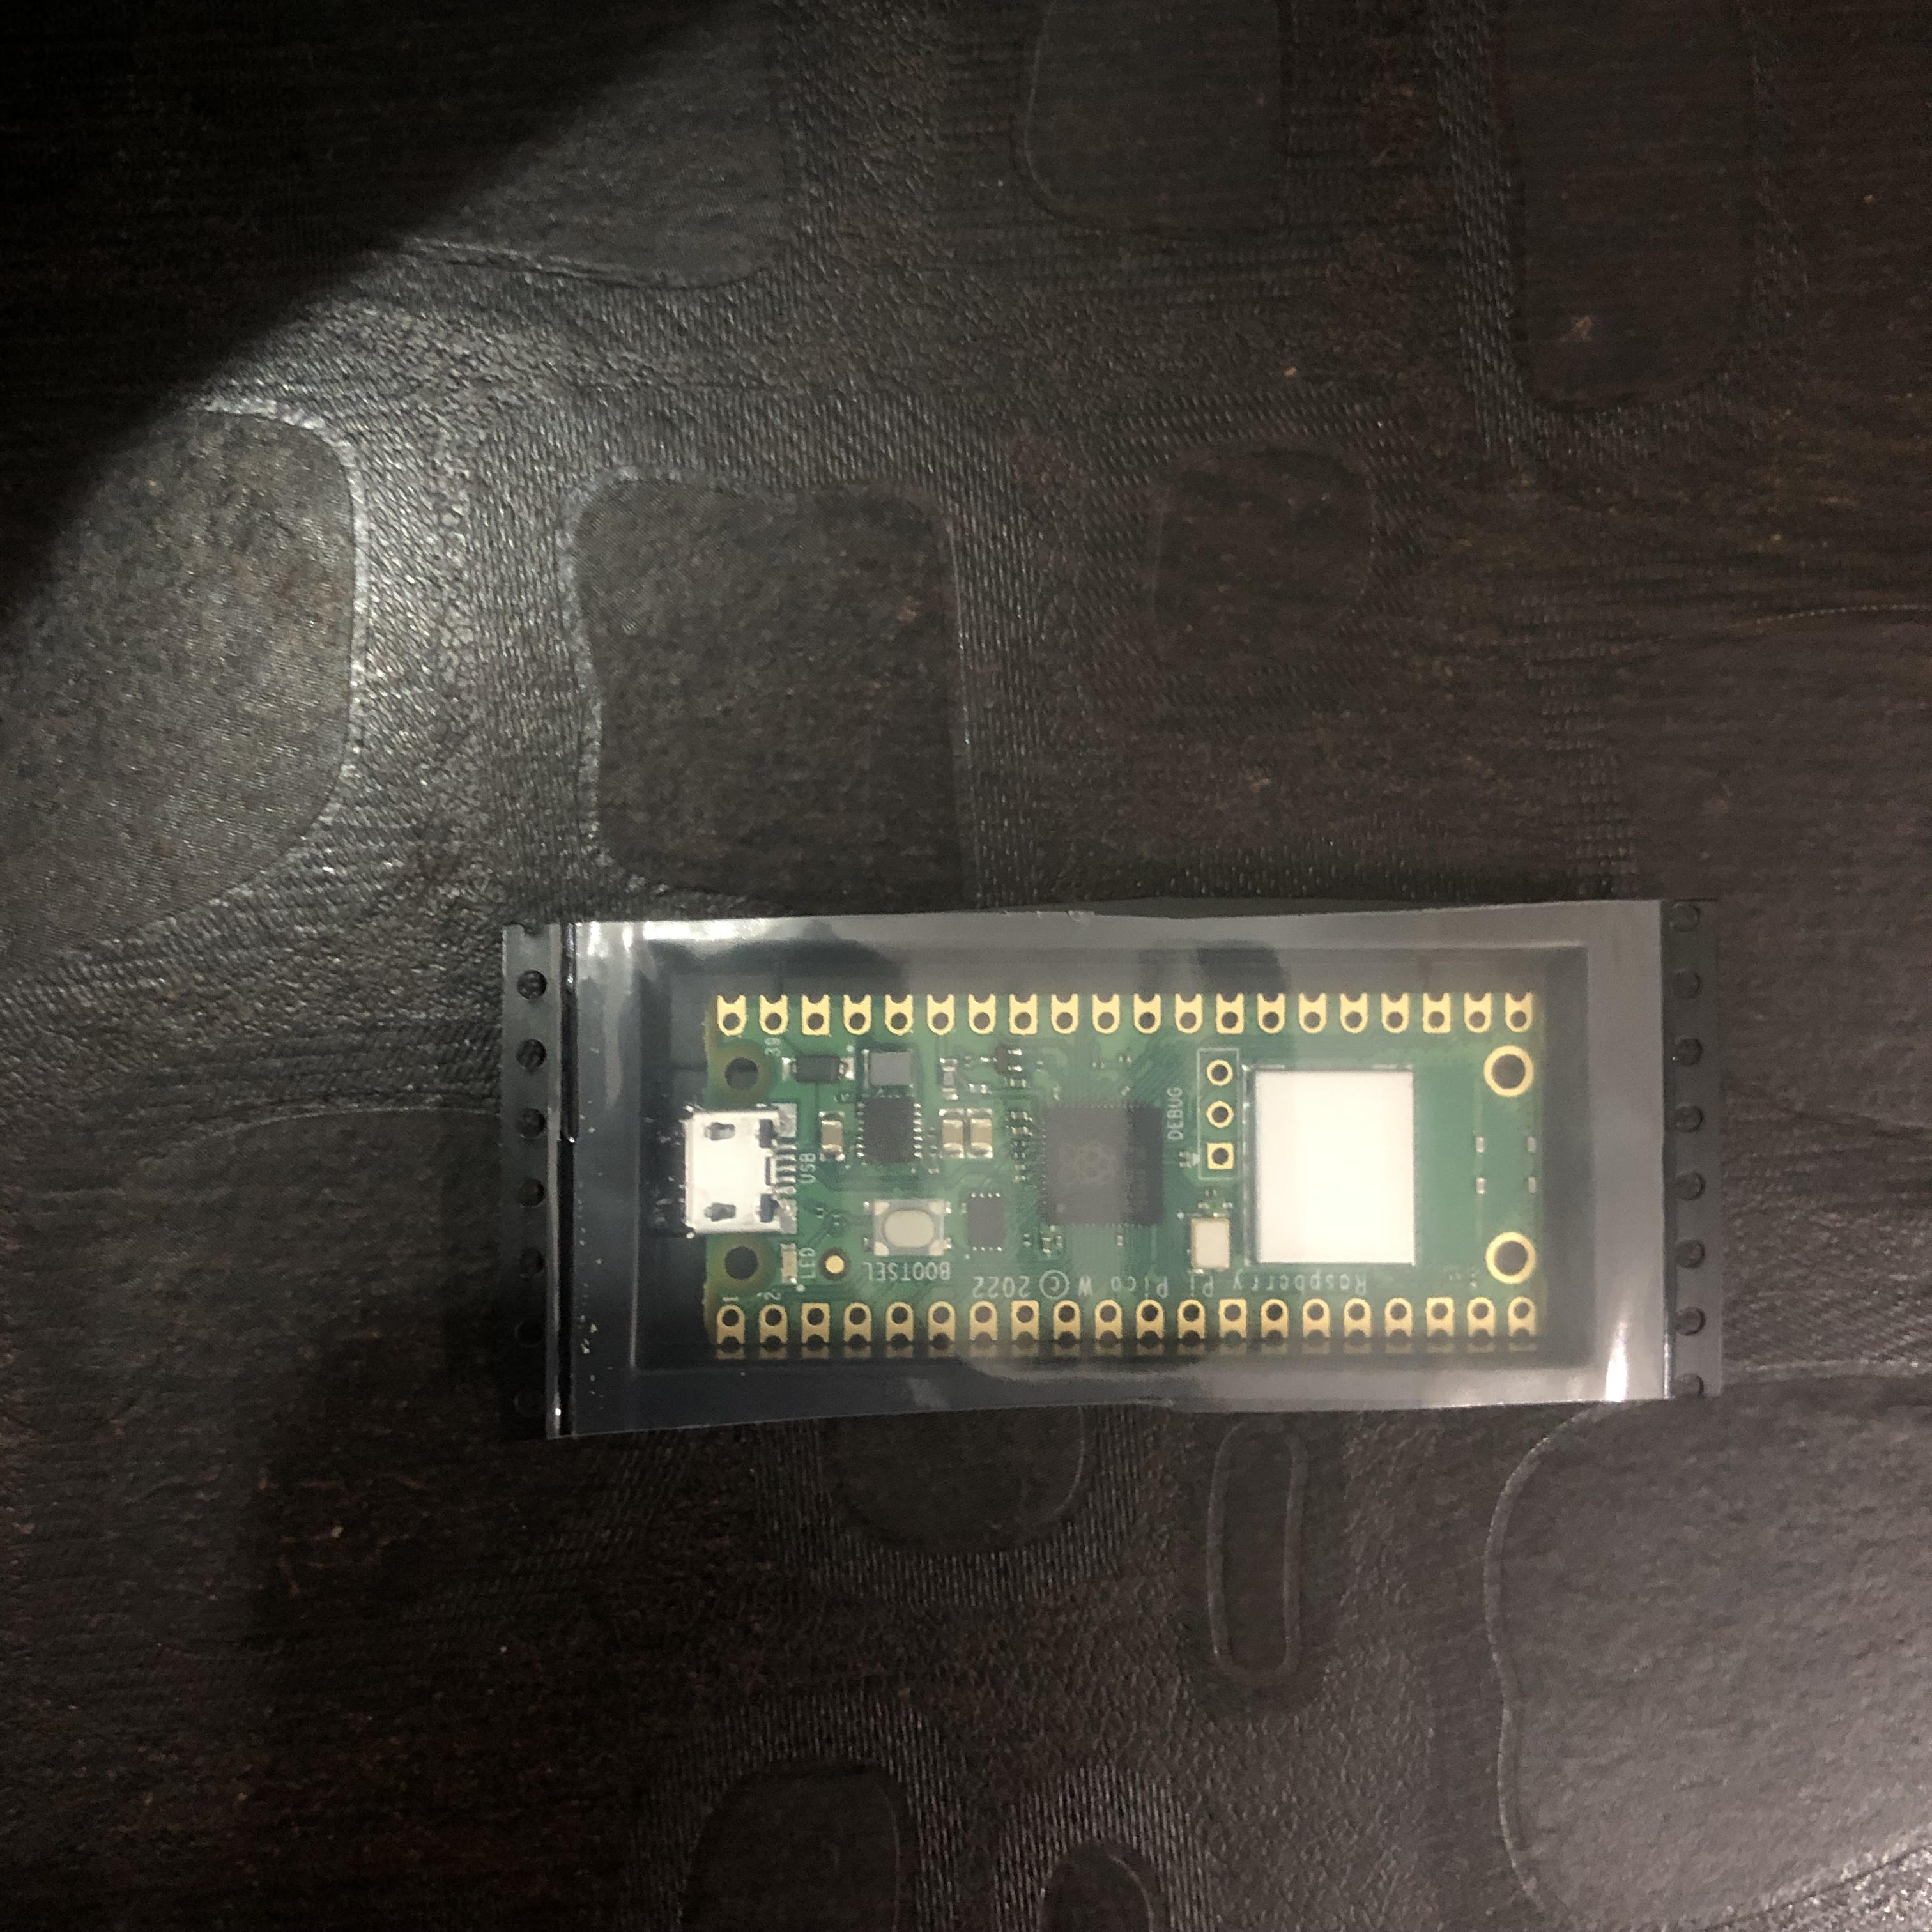 rpi pico in its packaging